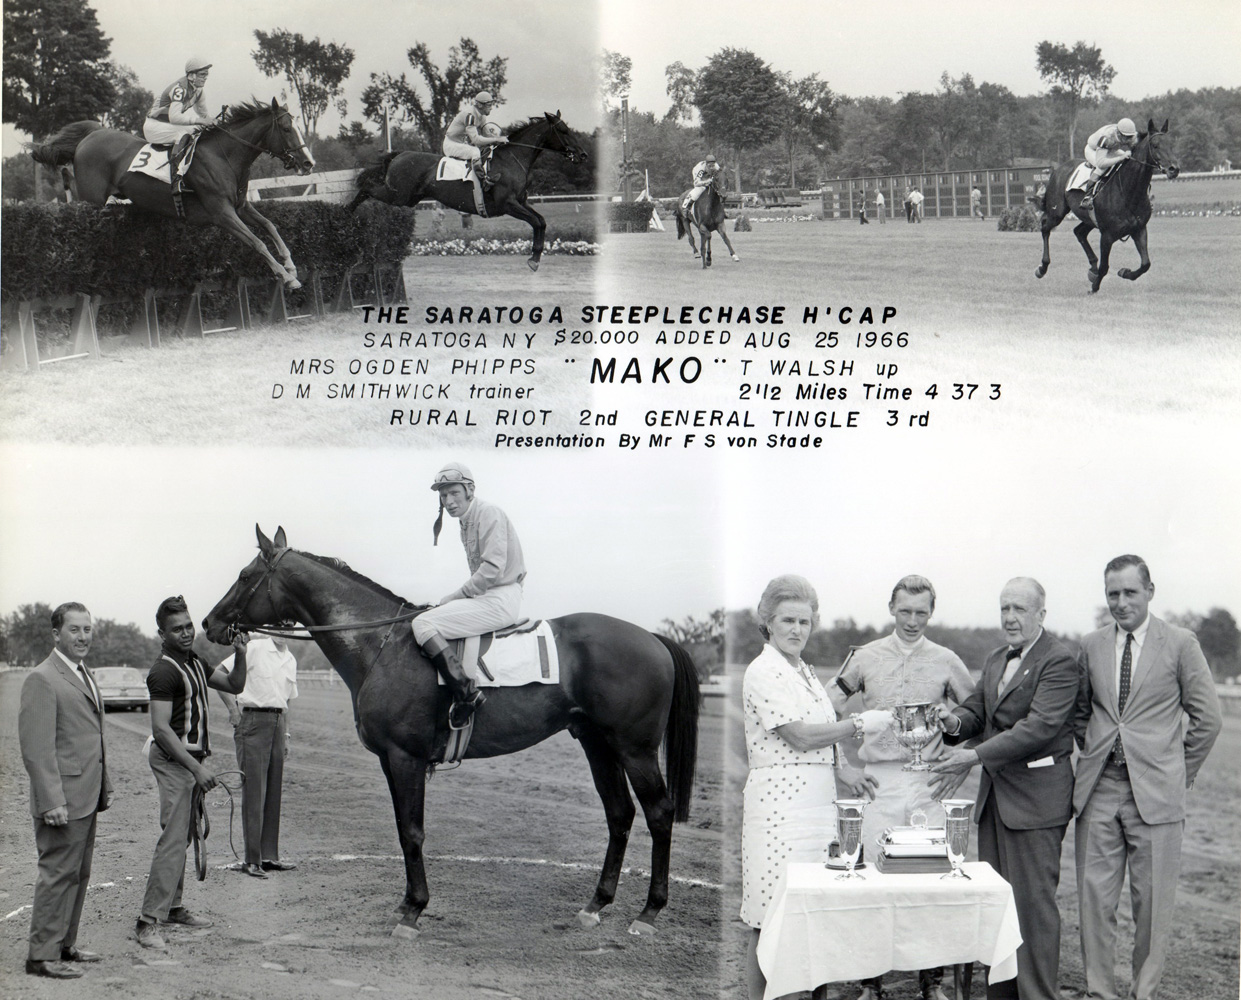 Win composite from the 1966 Saratoga Steeplechase Handicap at Aqueduct, won by Tommy Walsh and Mako (NYRA/Museum Collection)